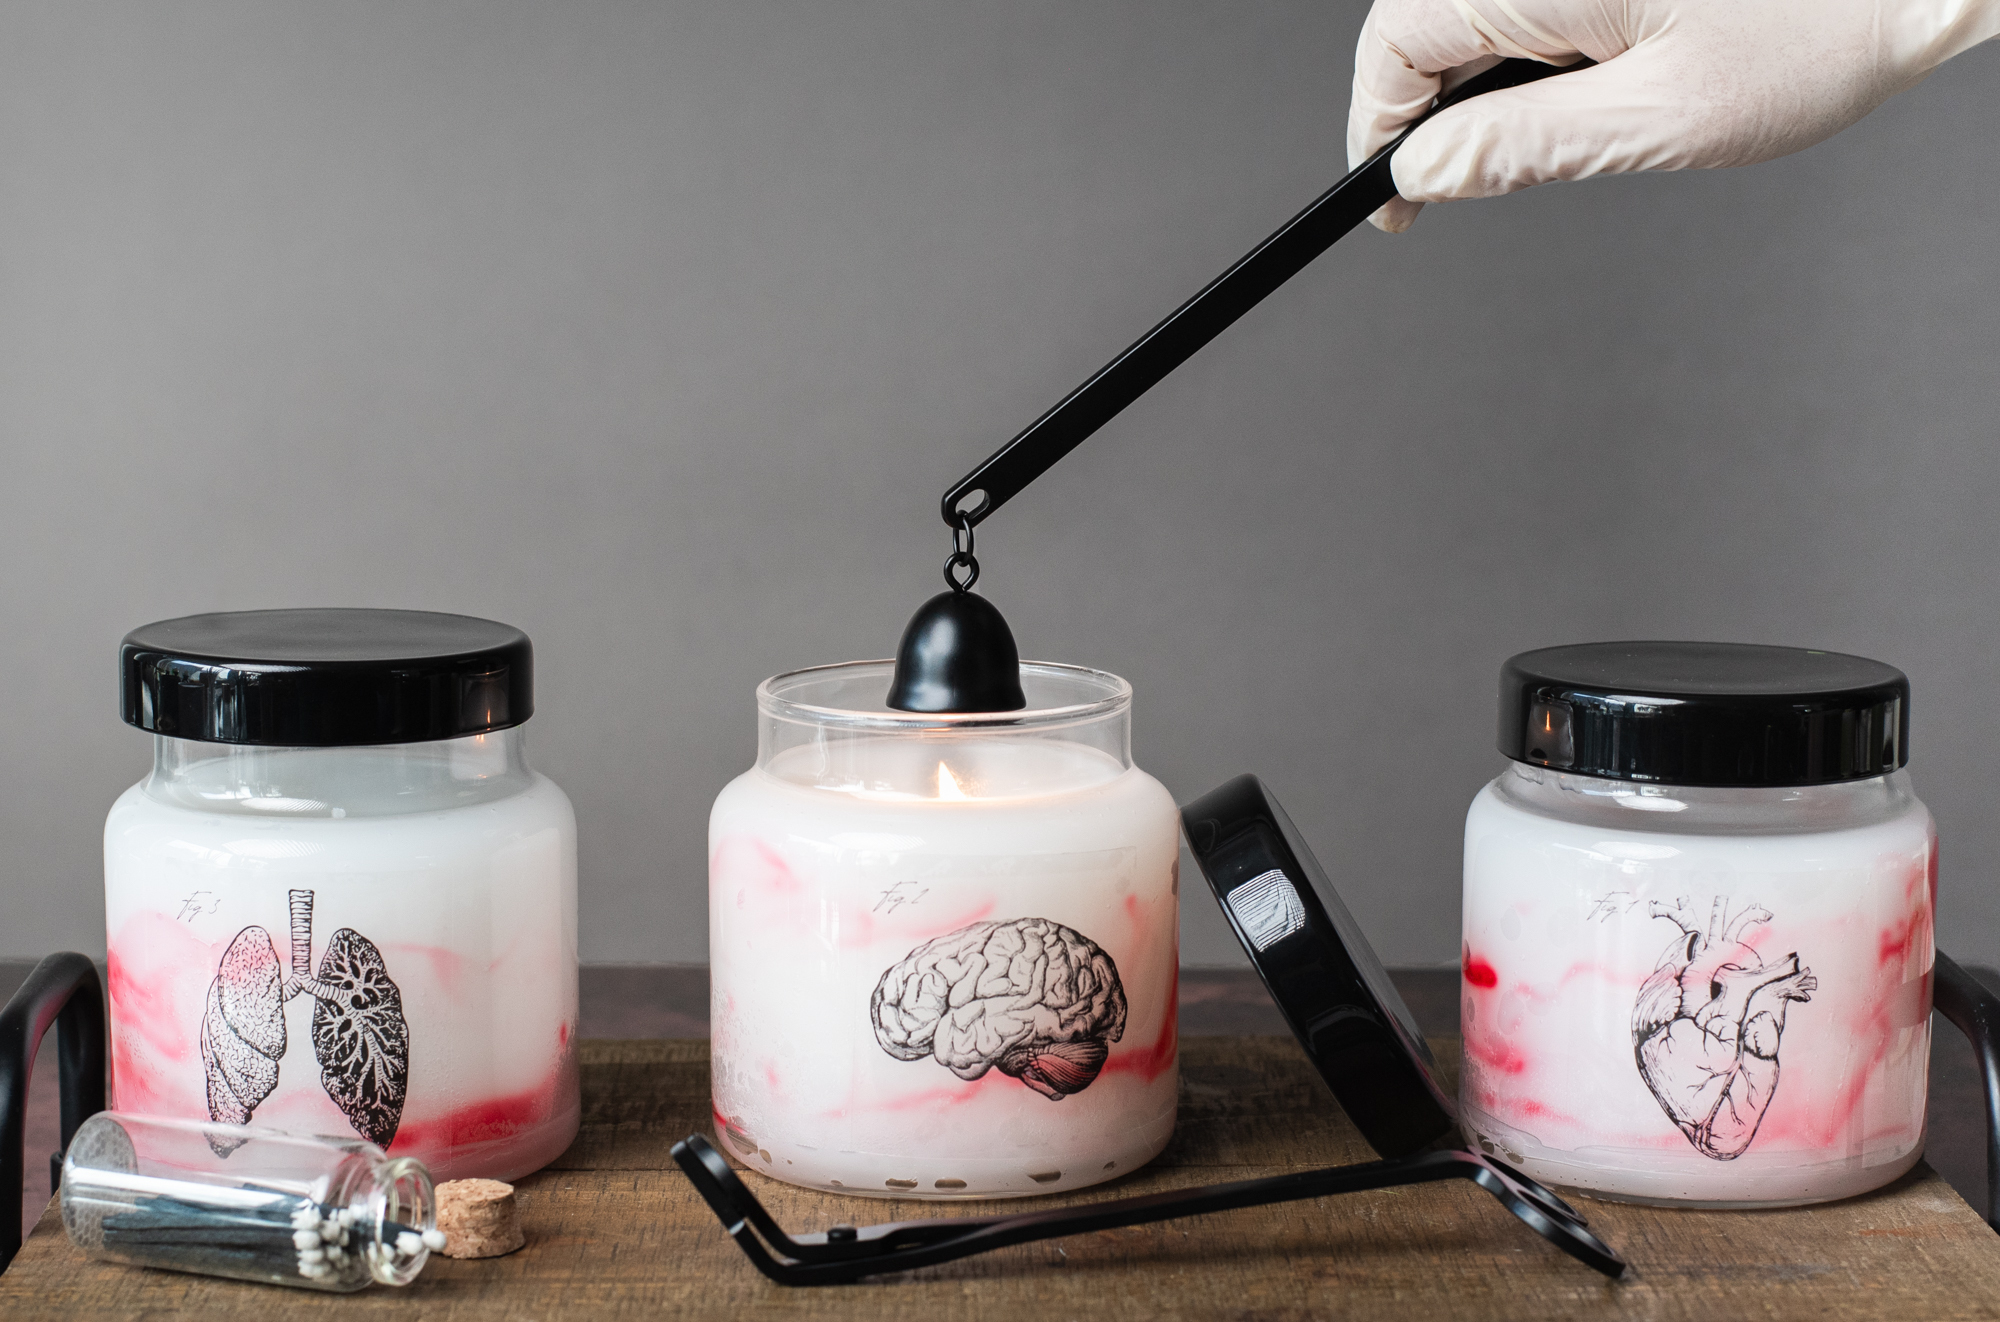 Three candles in a row made in 16 oz glass apothecary jars with black glass lids. The candles are dyed red with a marbled technique. Images of lungs, a brain, and a heart are on the outside of the candles. A gloved hand reaches into the frame with a black candle snuffer to extinguish the center candle.